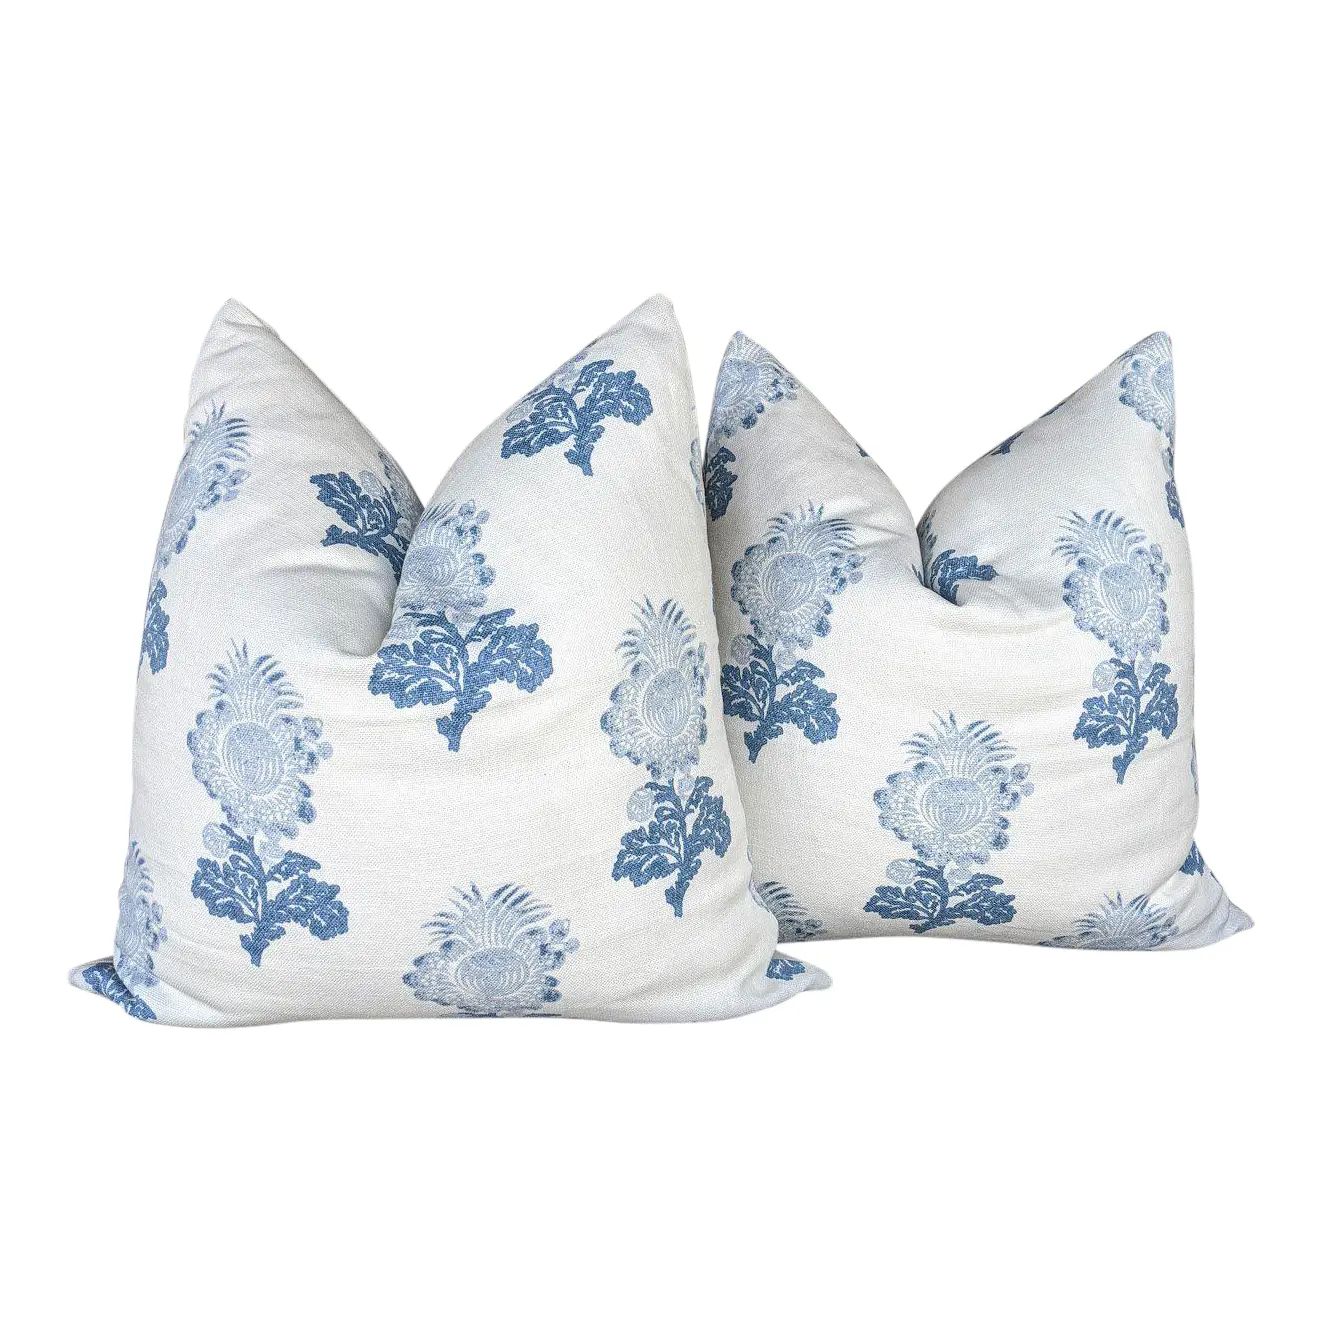 Aldith by Thibaut Block Print in Blue Pillow Covers- a Pair | Chairish